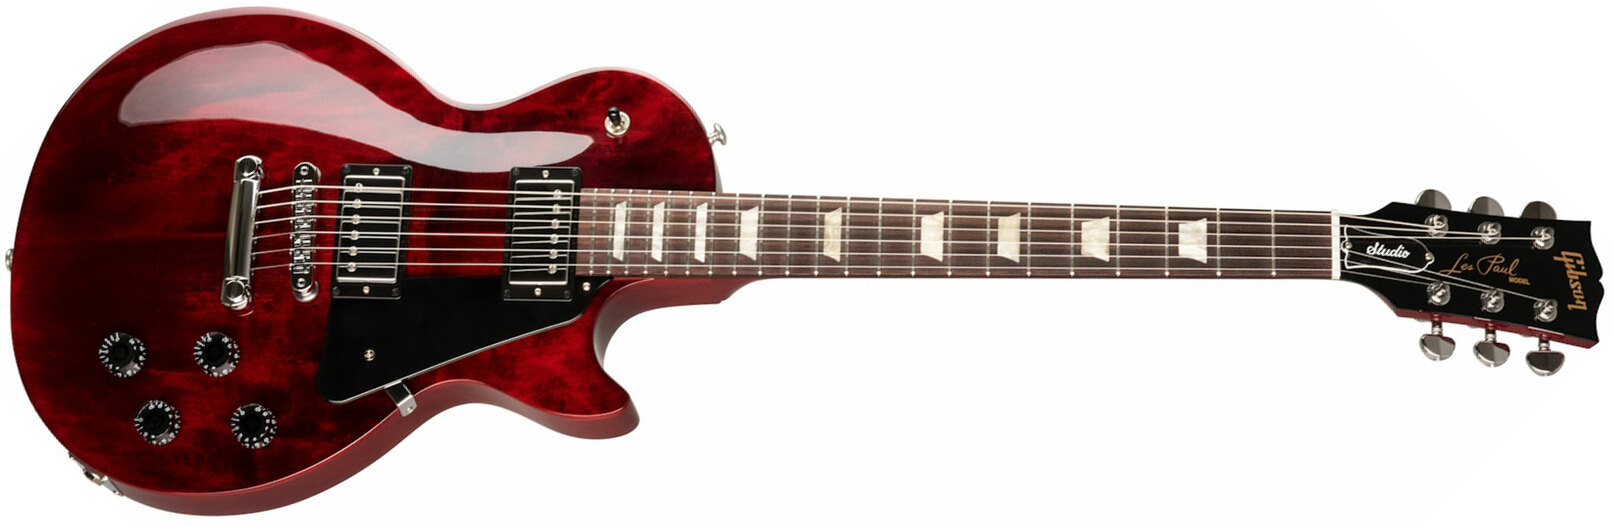 Gibson Les Paul Studio Modern 2019 2h Ht Rw - Wine Red - Single cut electric guitar - Main picture